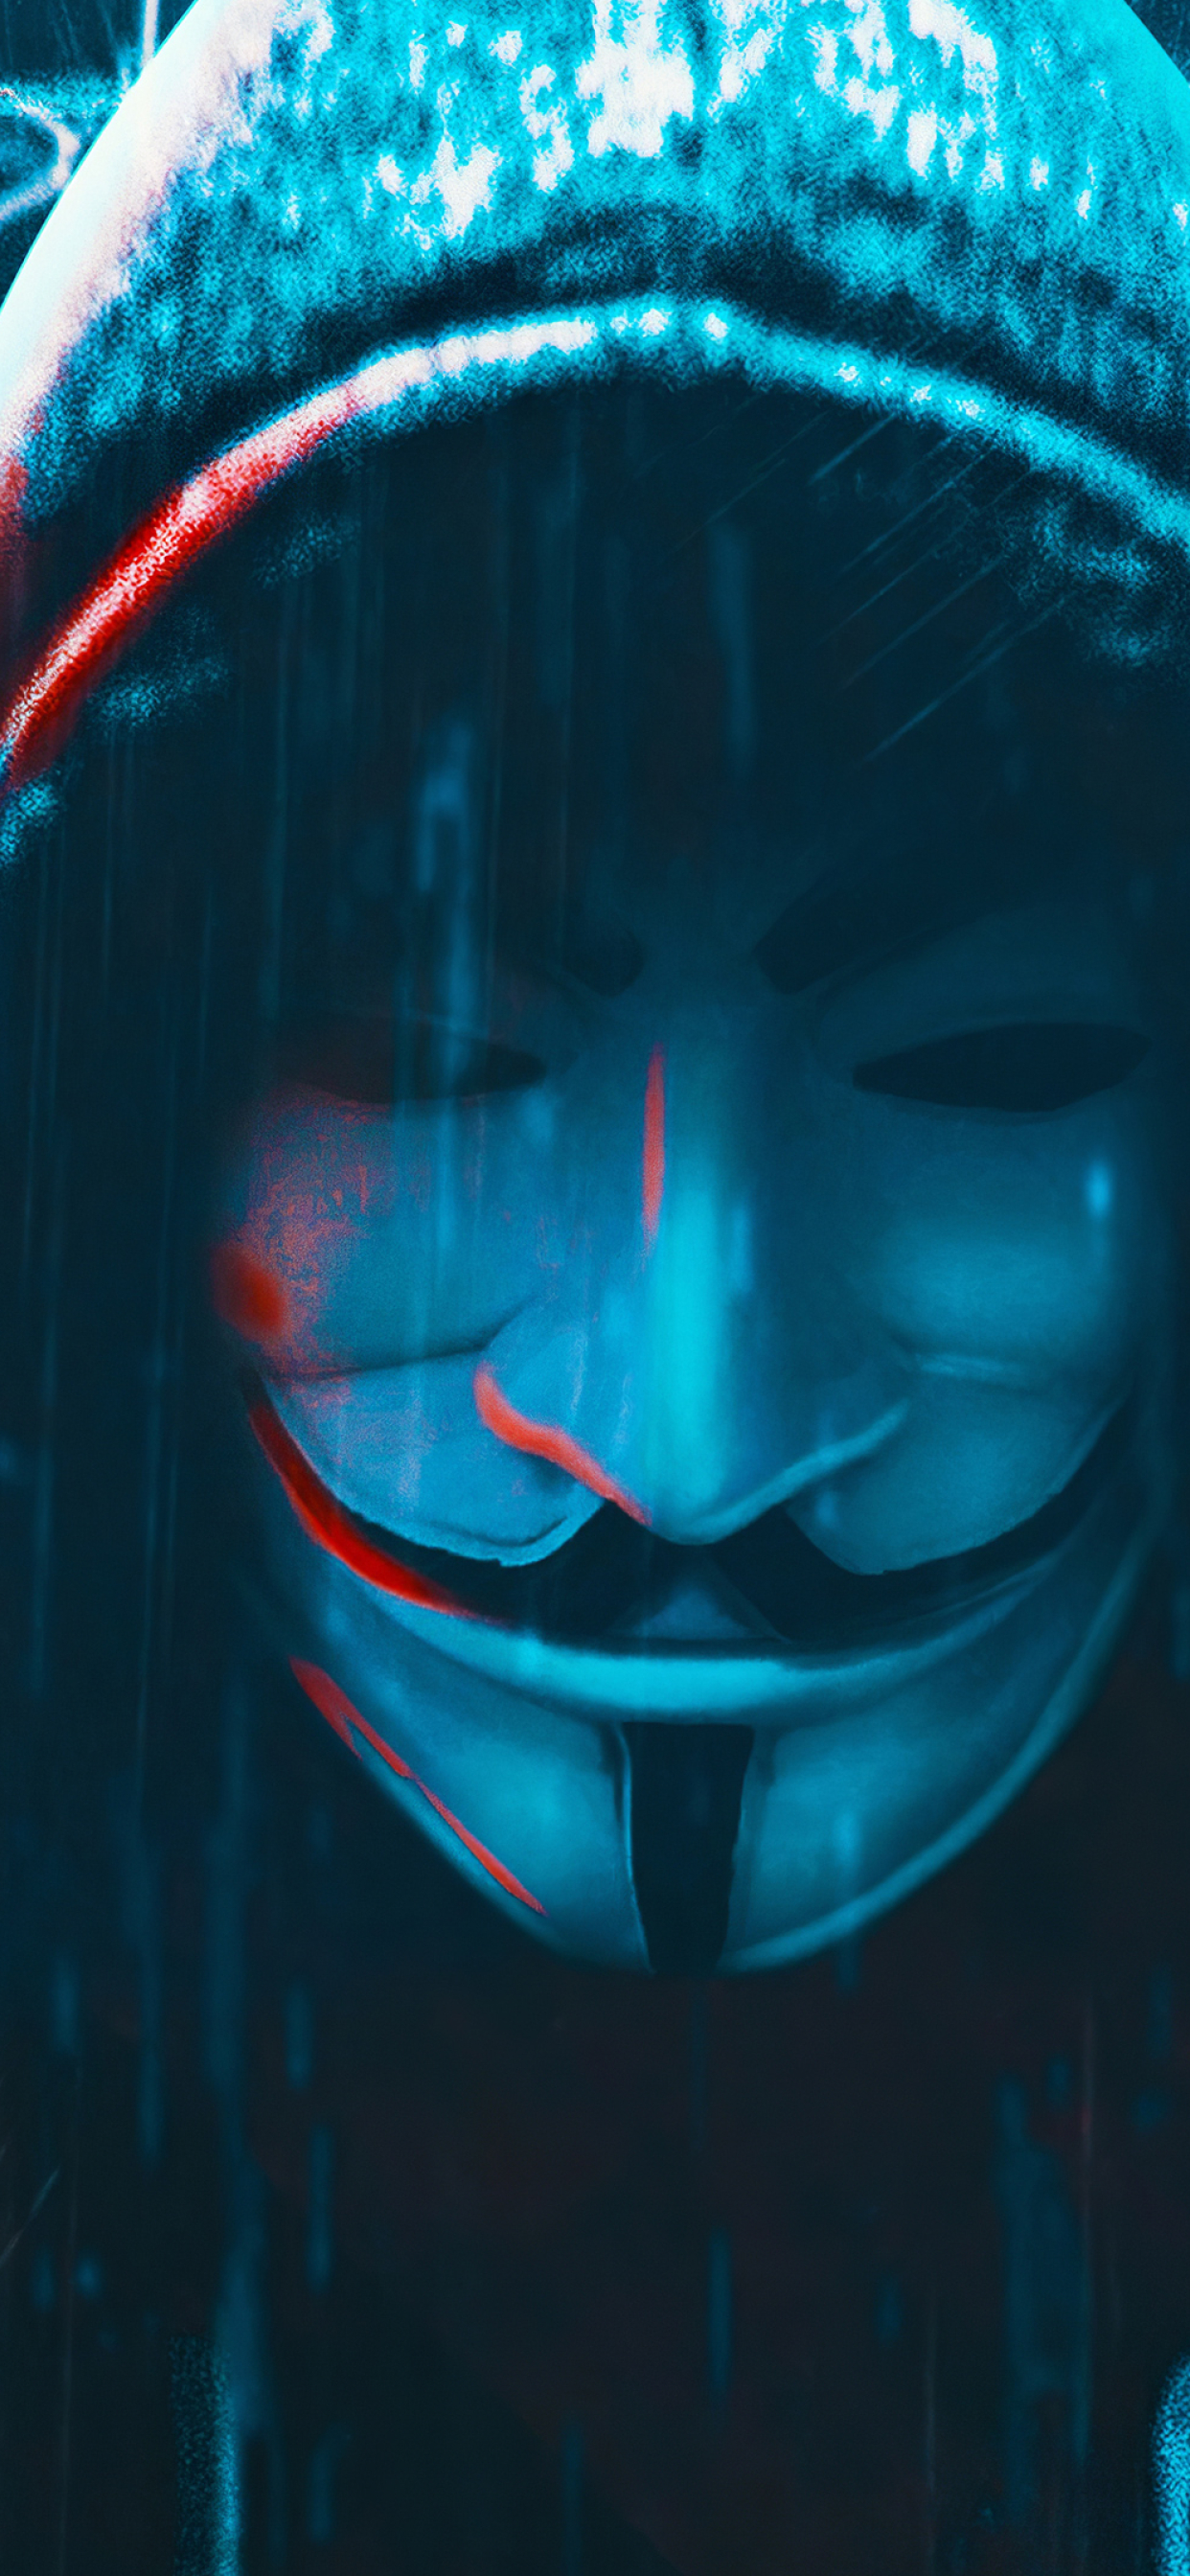 1242x26 Anonymous 4k Hacker Mask Iphone Xs Max Wallpaper Hd Artist 4k Wallpapers Images Photos And Background Wallpapers Den